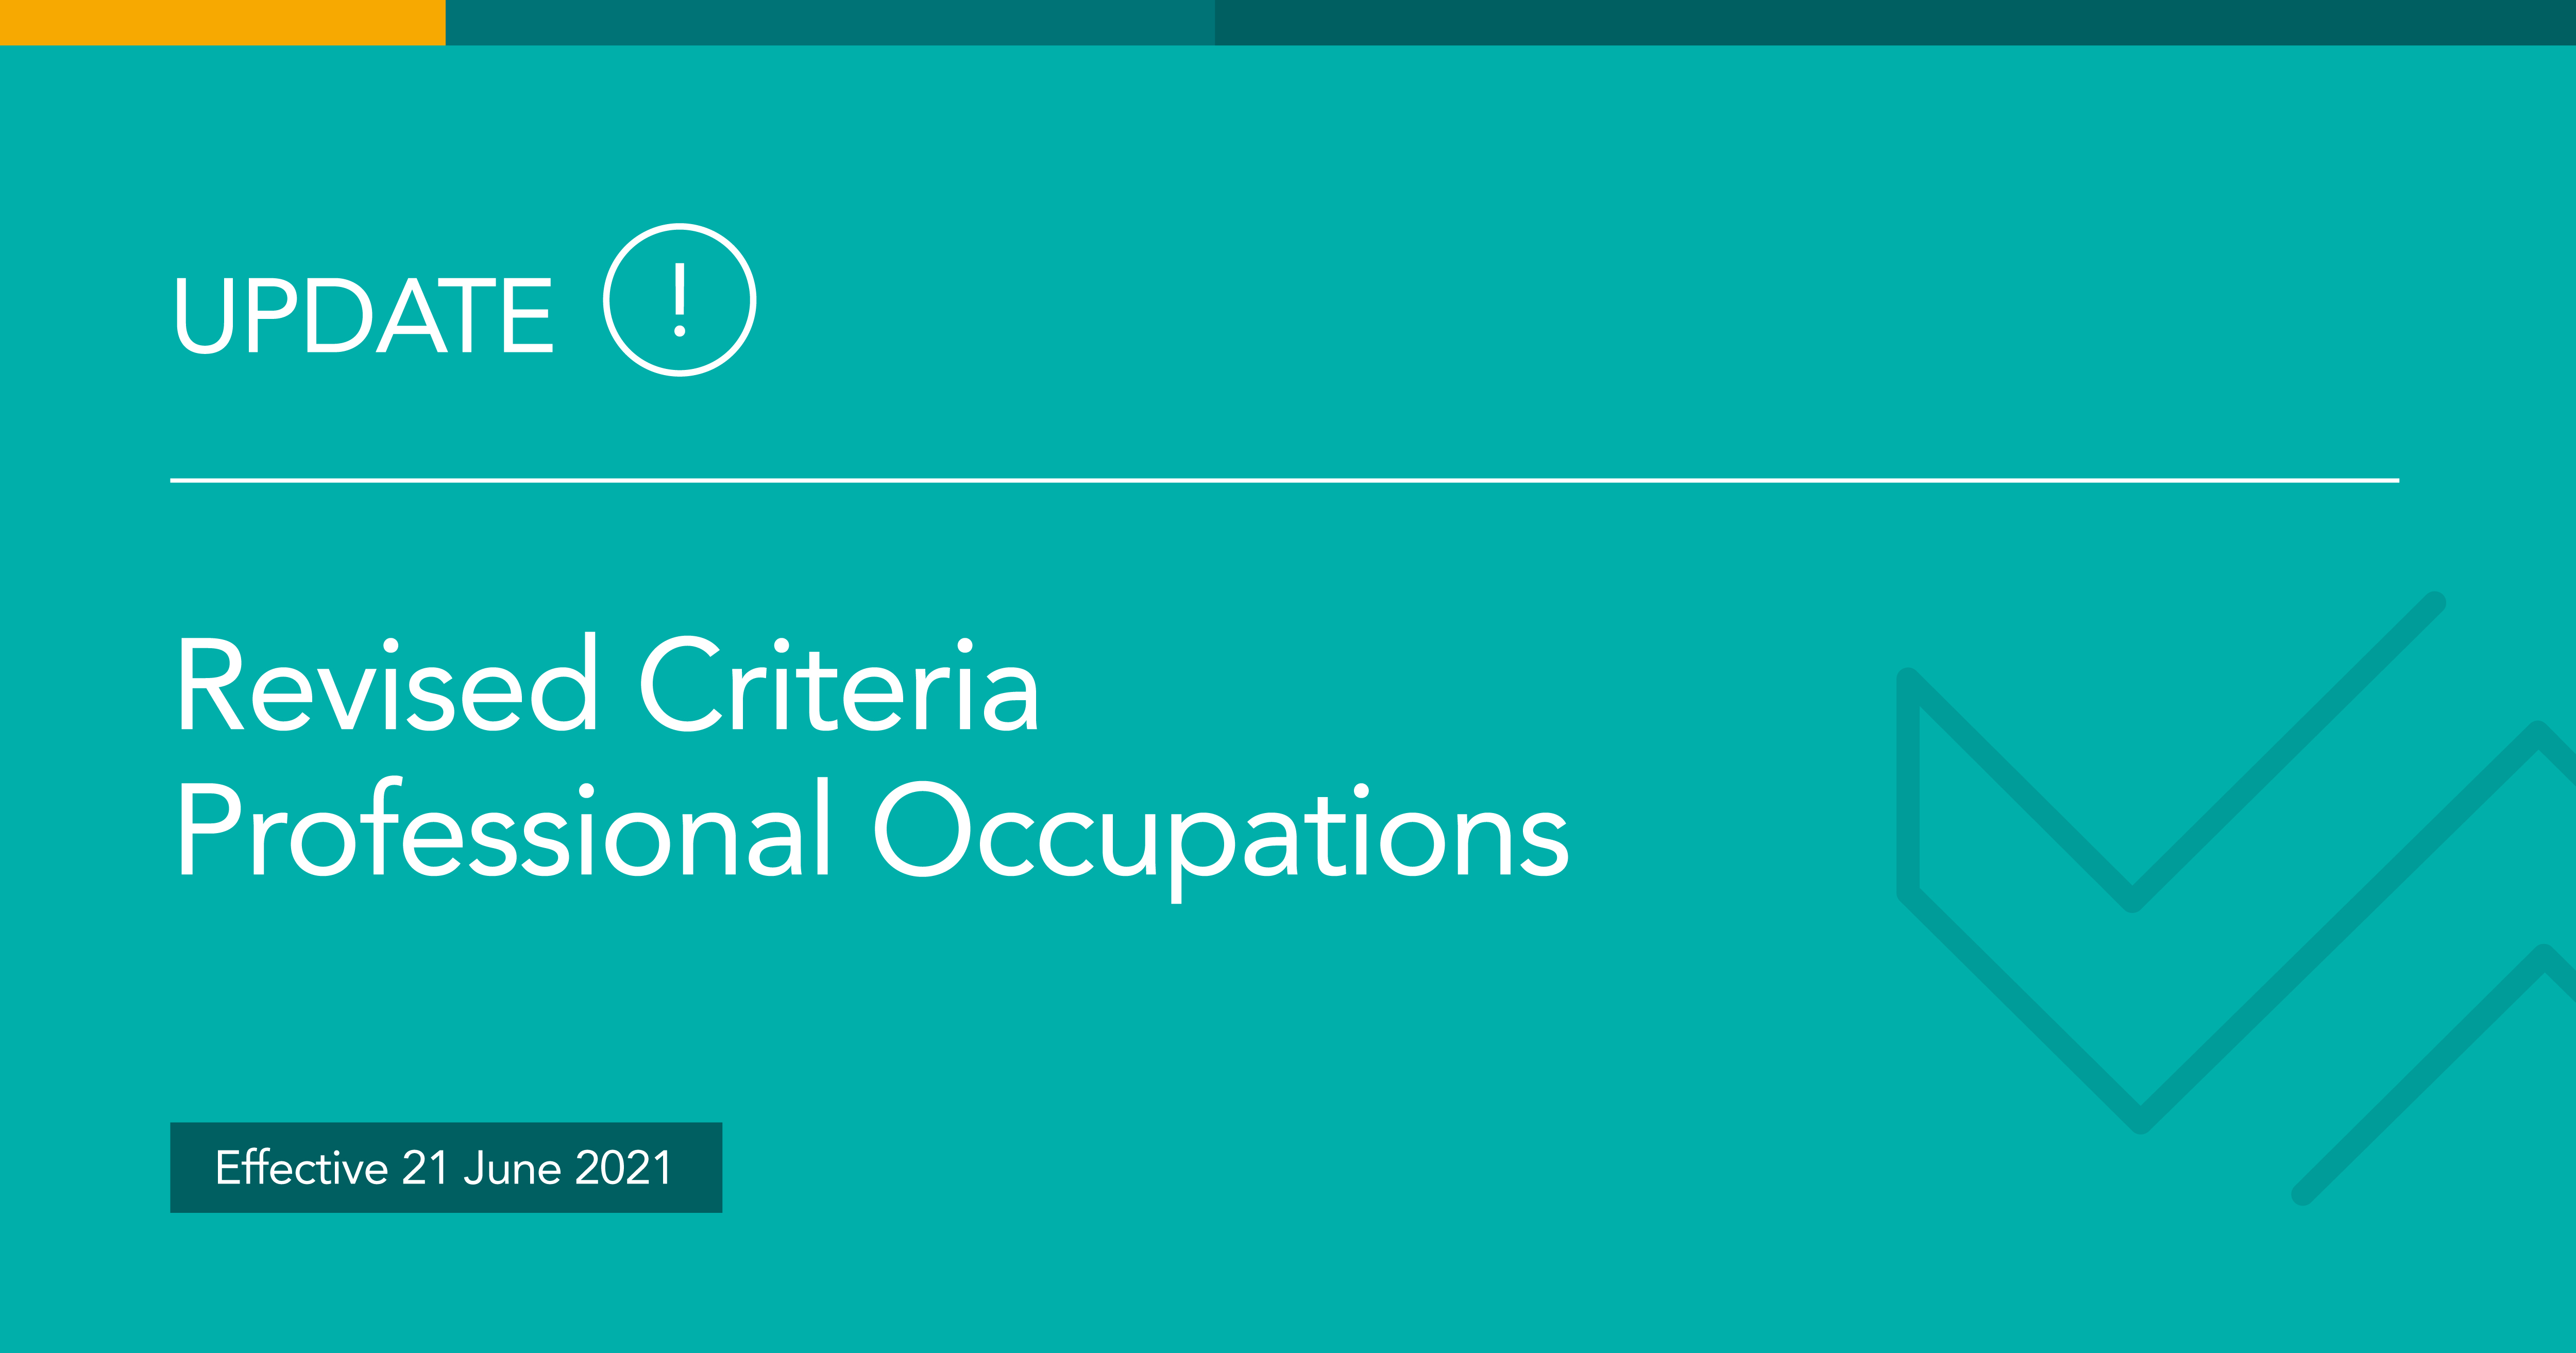  Revised criteria for professional occupations